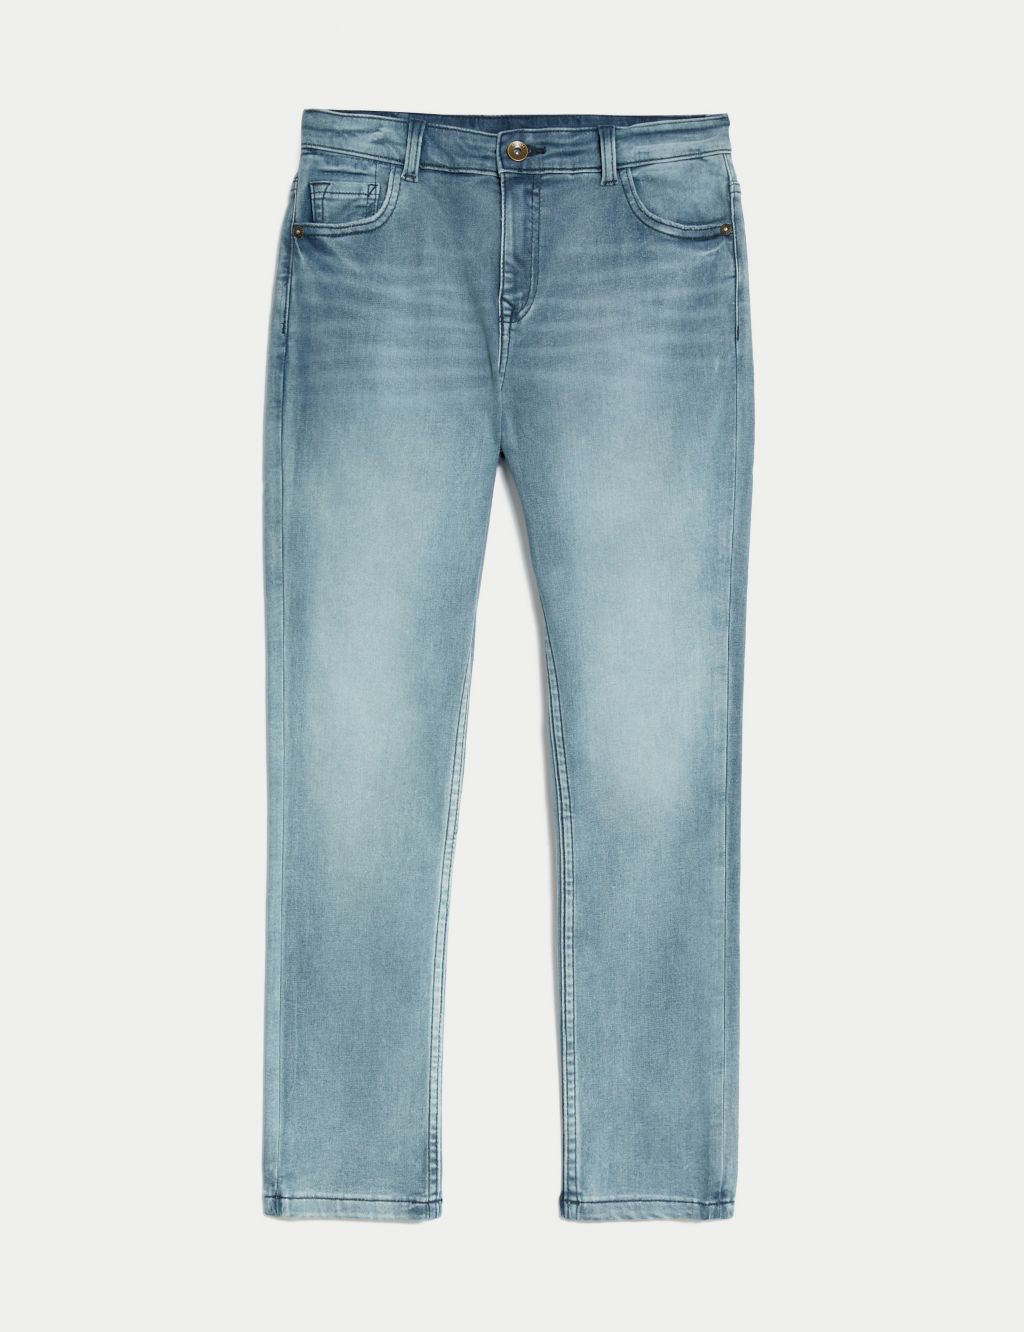 The Jones Straight Fit Cotton with Stretch Jeans (6-16 Yrs) image 2